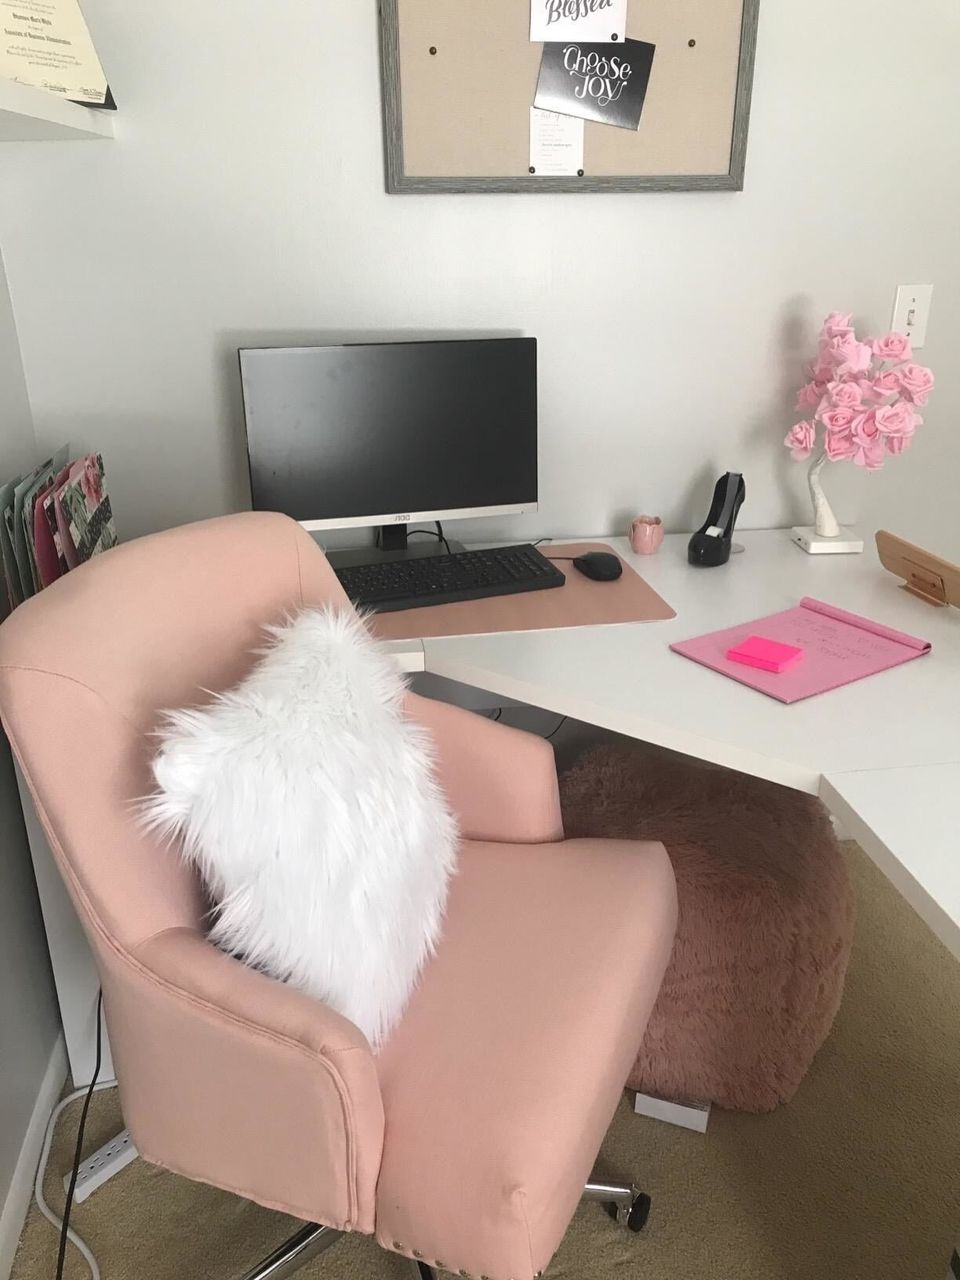 7 Must Have Items For Your Home Office - Decorator's Voice